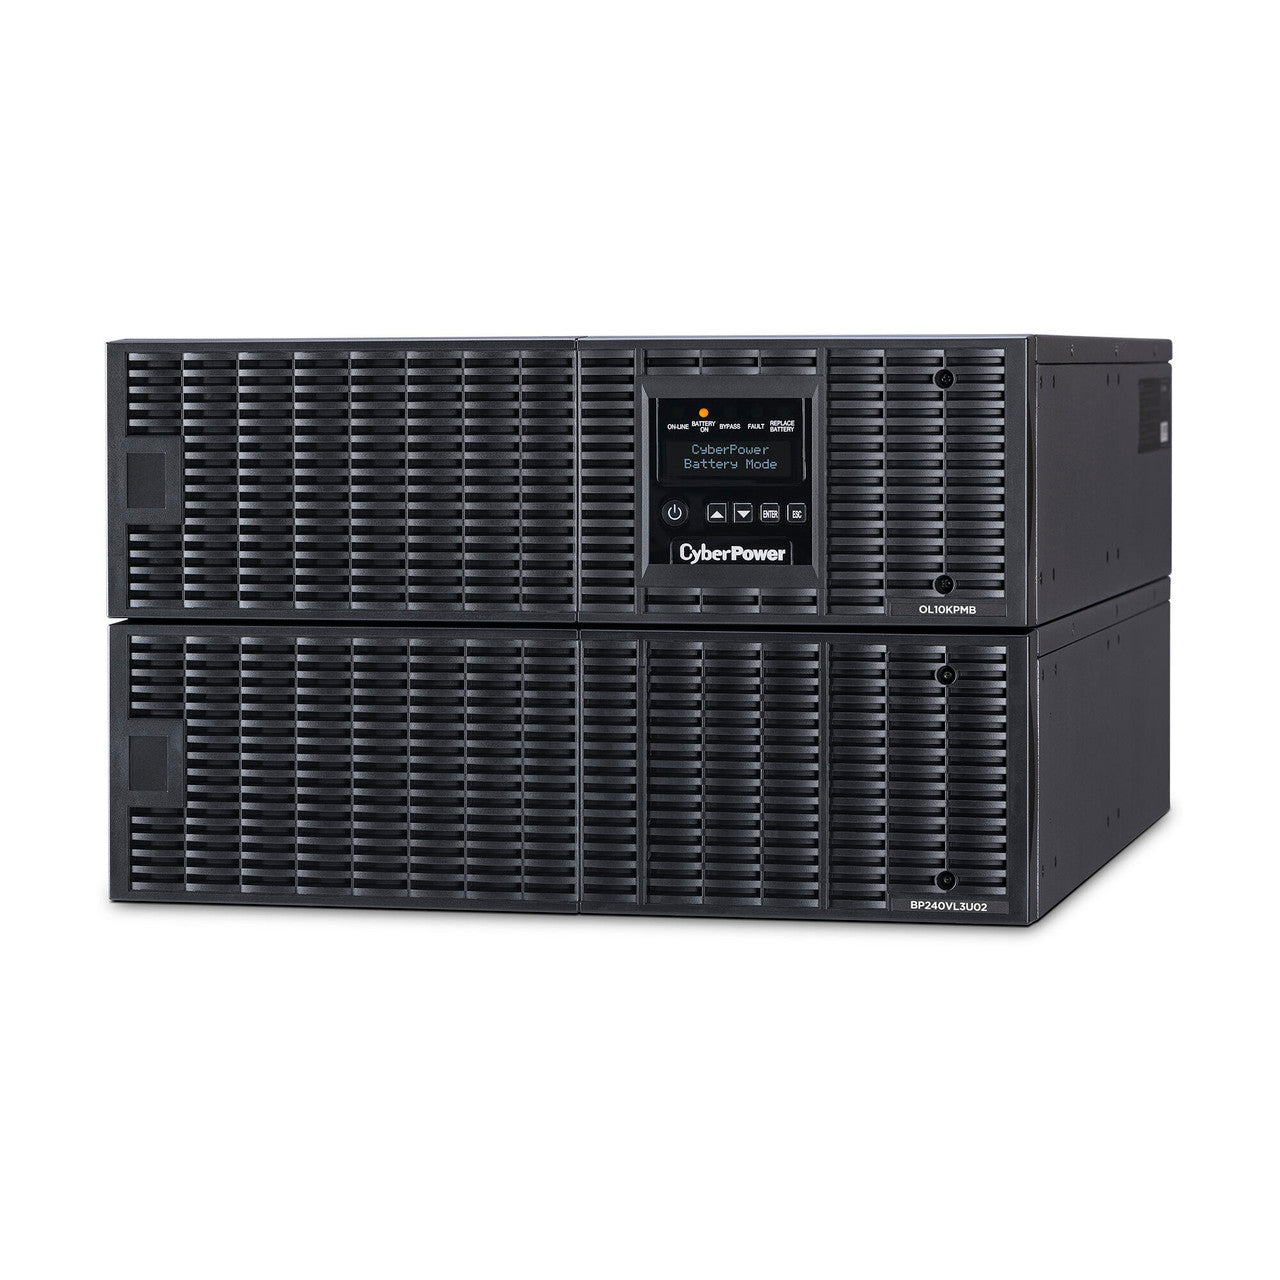 CyberPower OL10KRTHW 10KVA/10KW, online double-conversion UPS, maintenance bypass switch